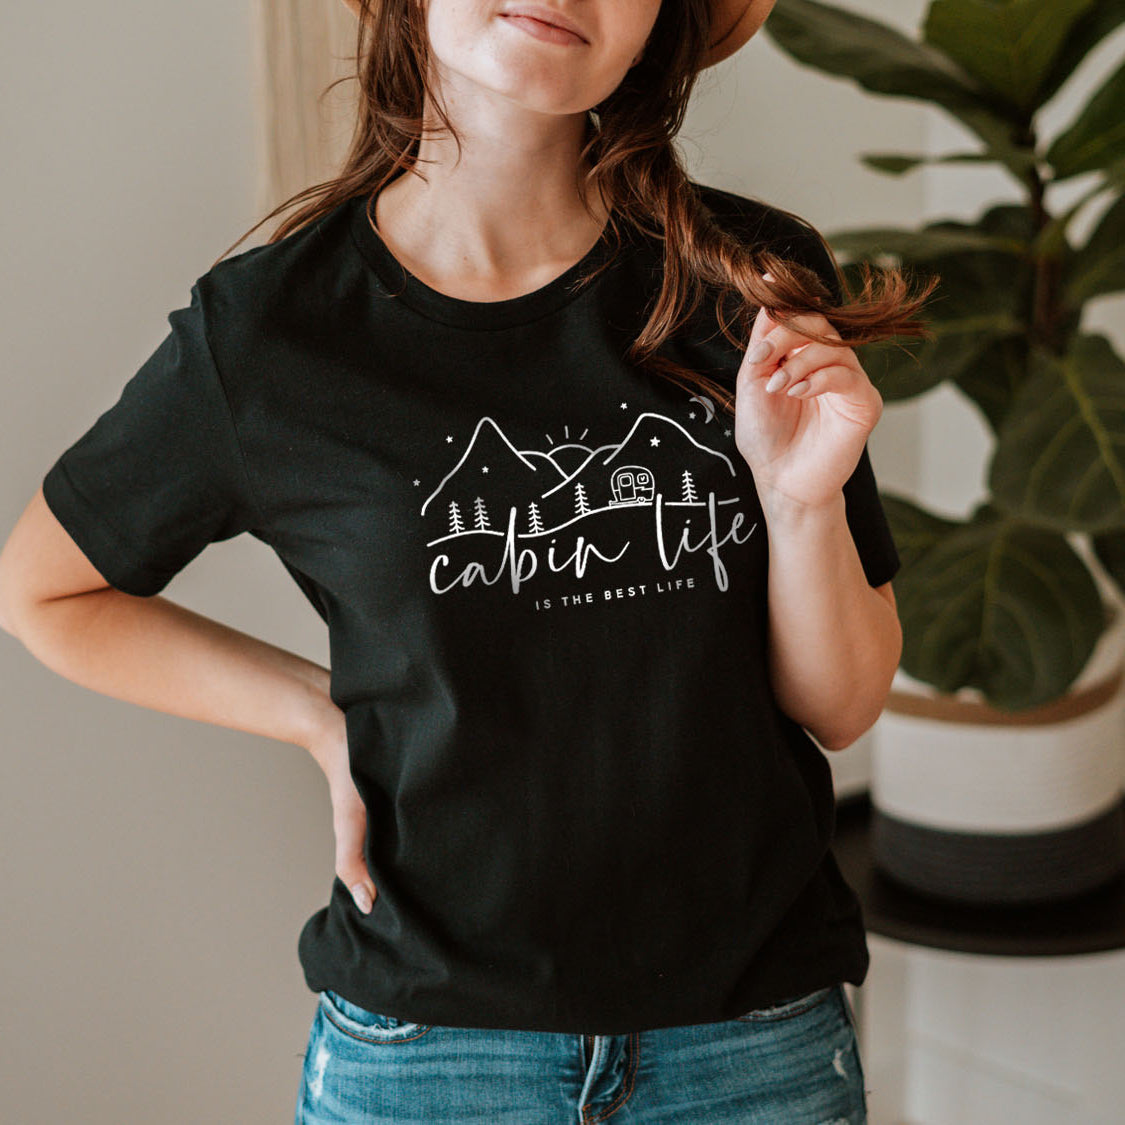 Cabin Life Is The Best Life T-shirt - Outdoor Nature Camping Retro Vintage Design Printed Tee Shirt